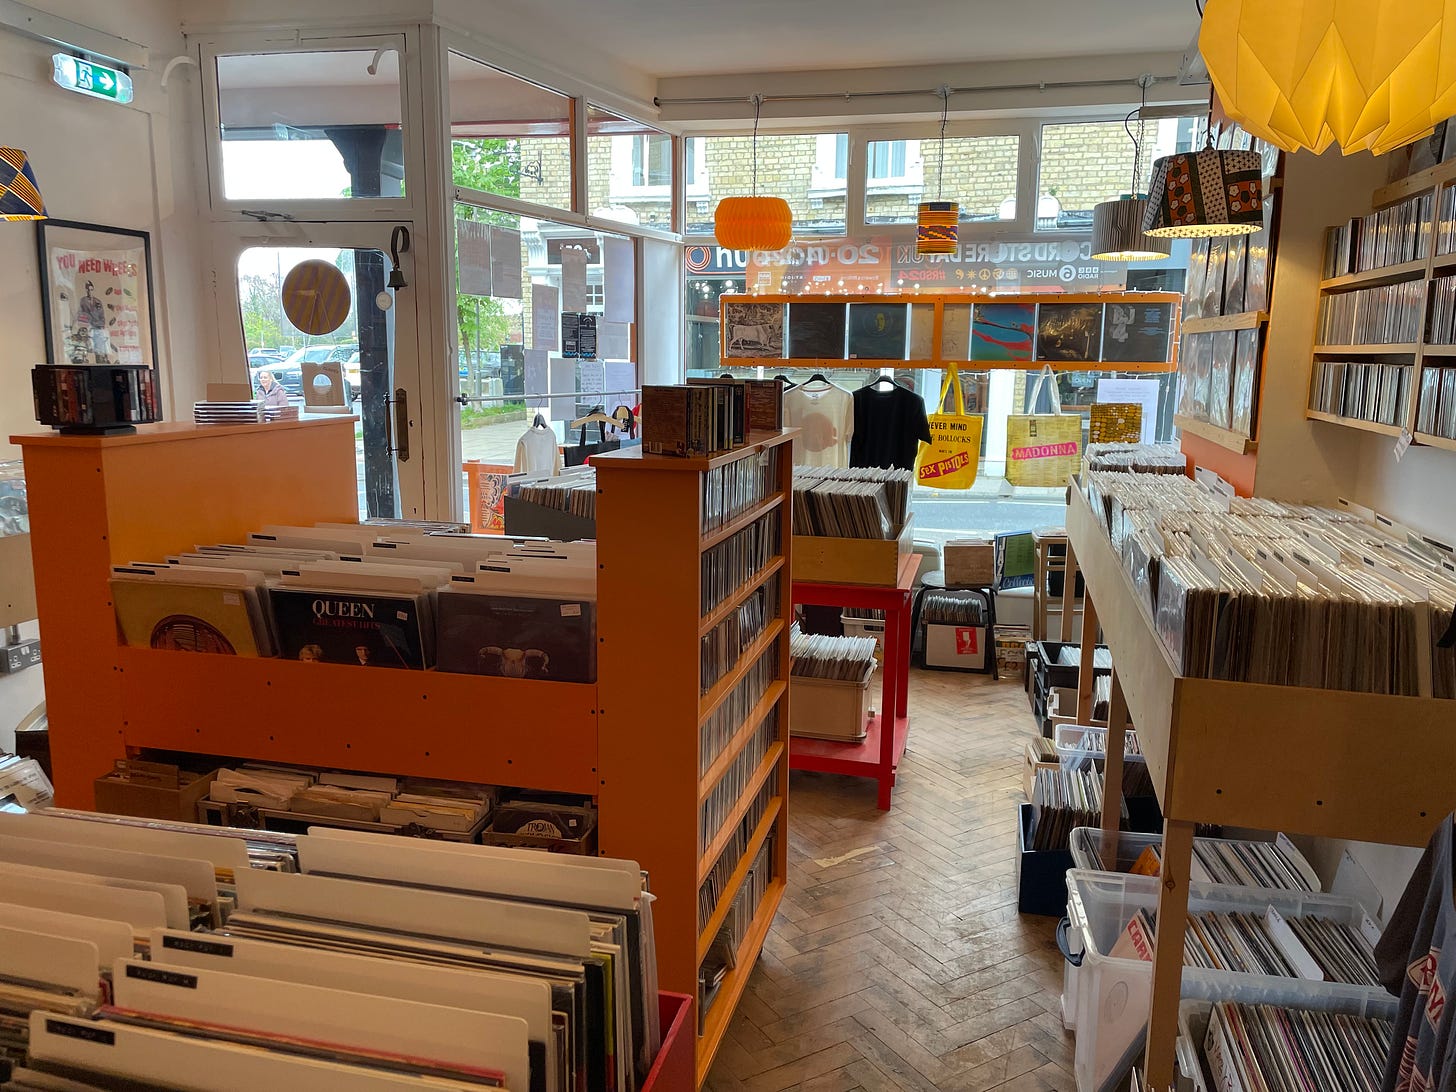 In Olaf's, the racks are packed with new and used vinyl - plus there’s a modest number of used CDs for sale